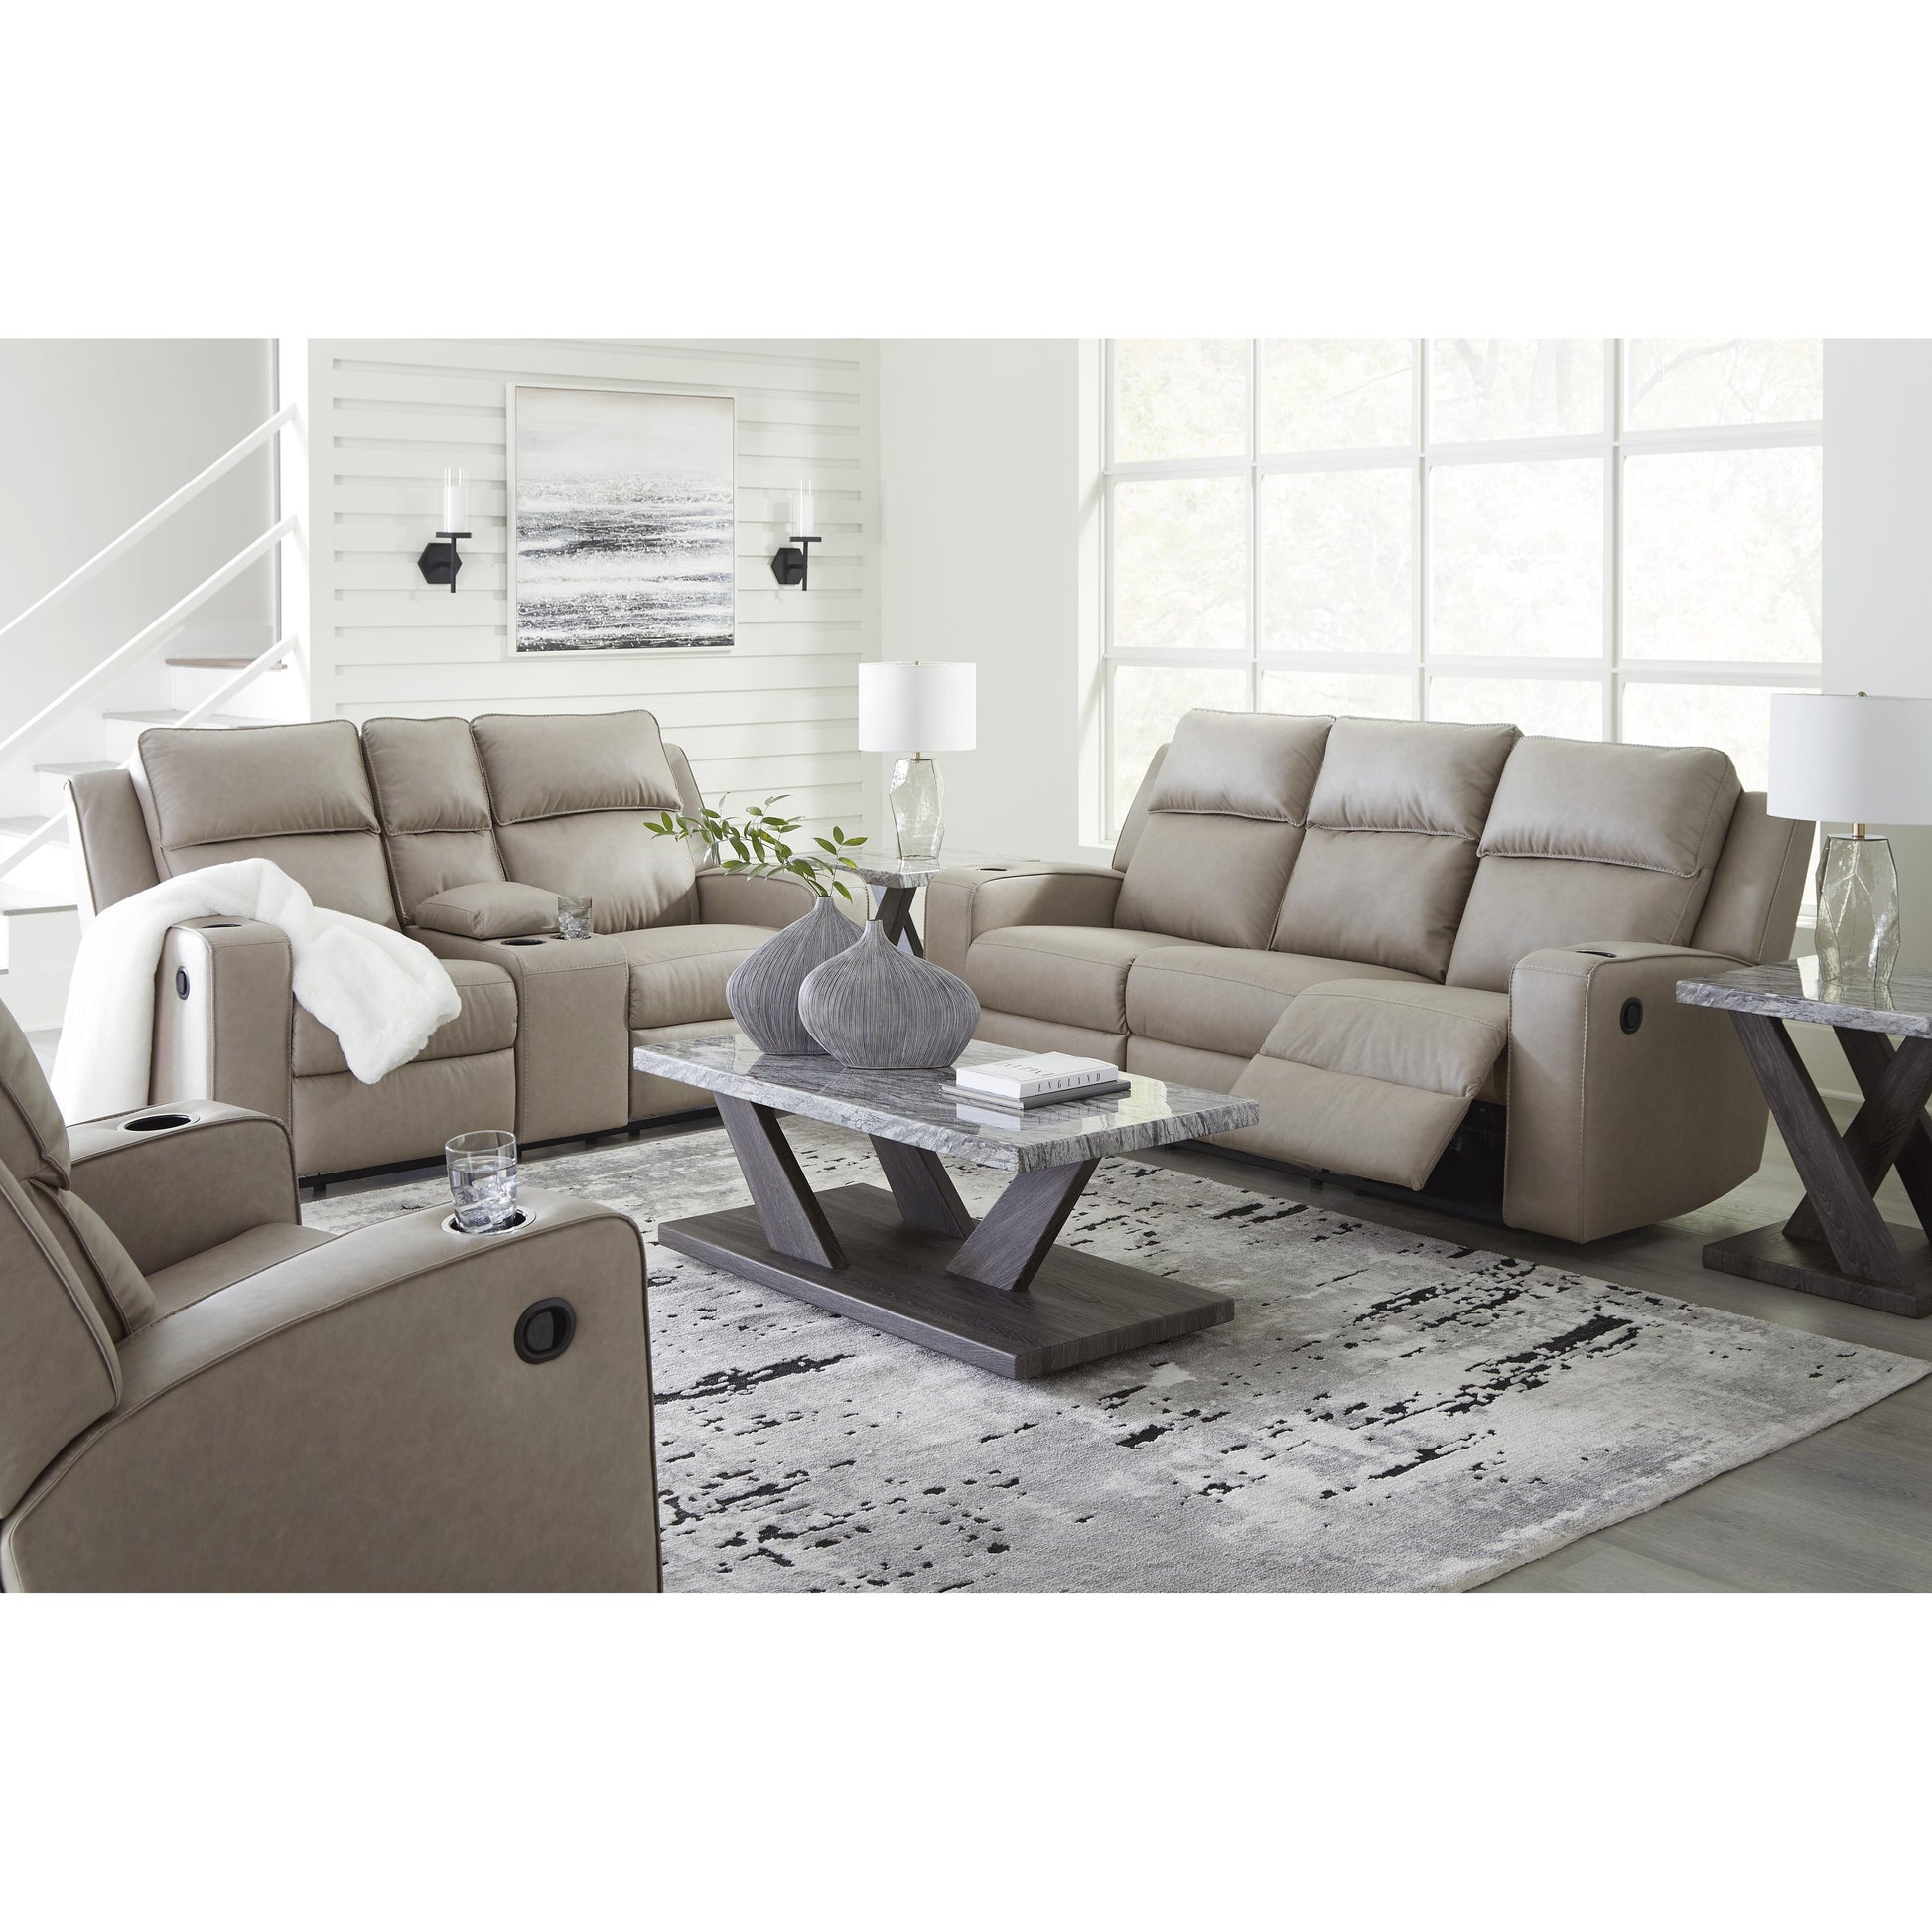 Signature Design by Ashley Lavenhorne Reclining Leather Look Loveseat 6330794 IMAGE 12